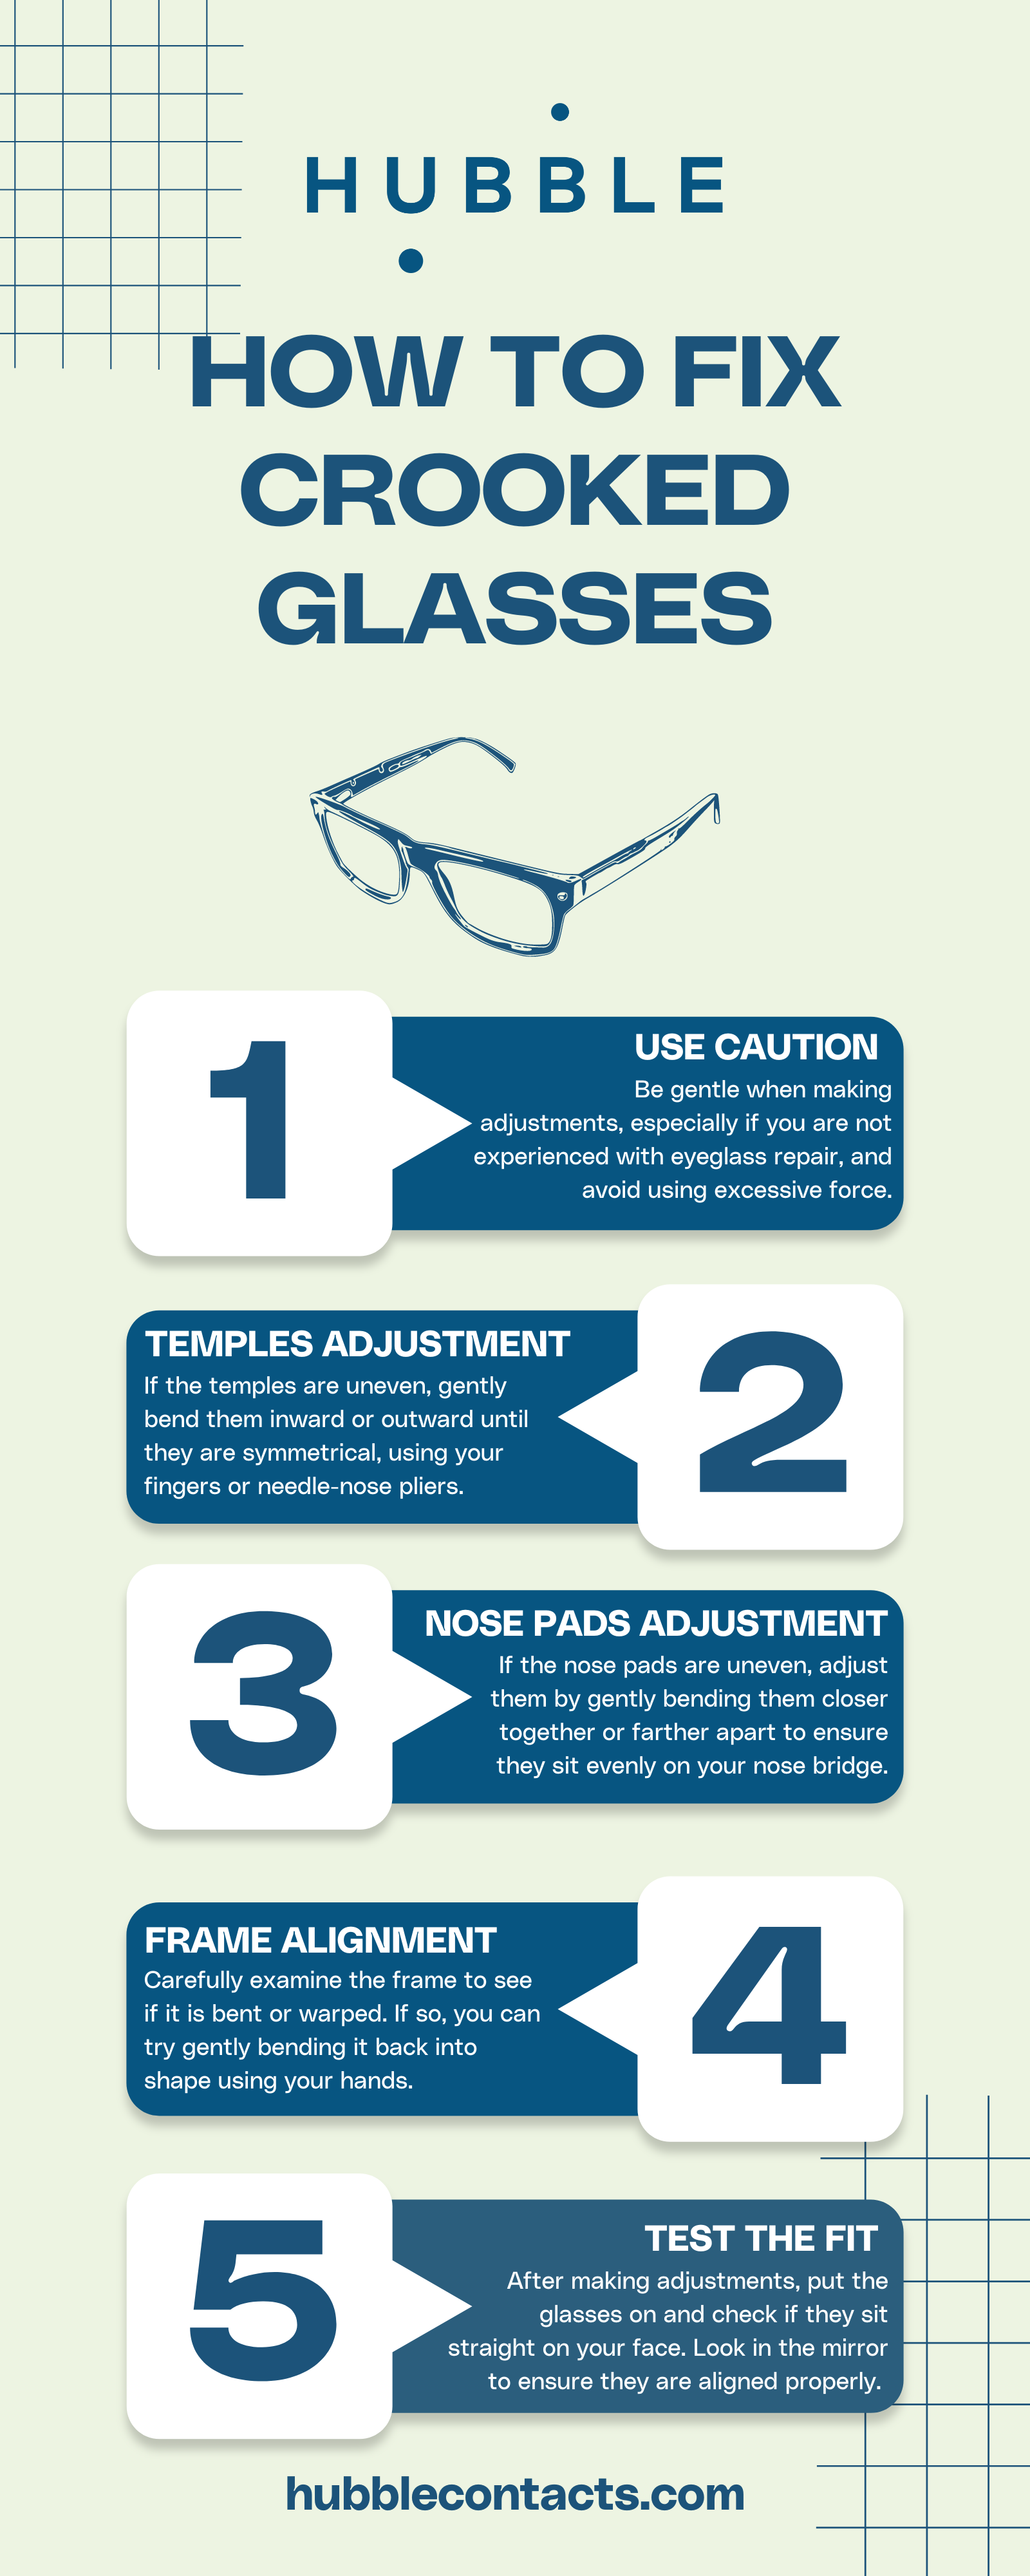 How to Fix Crooked Glasses Infographic